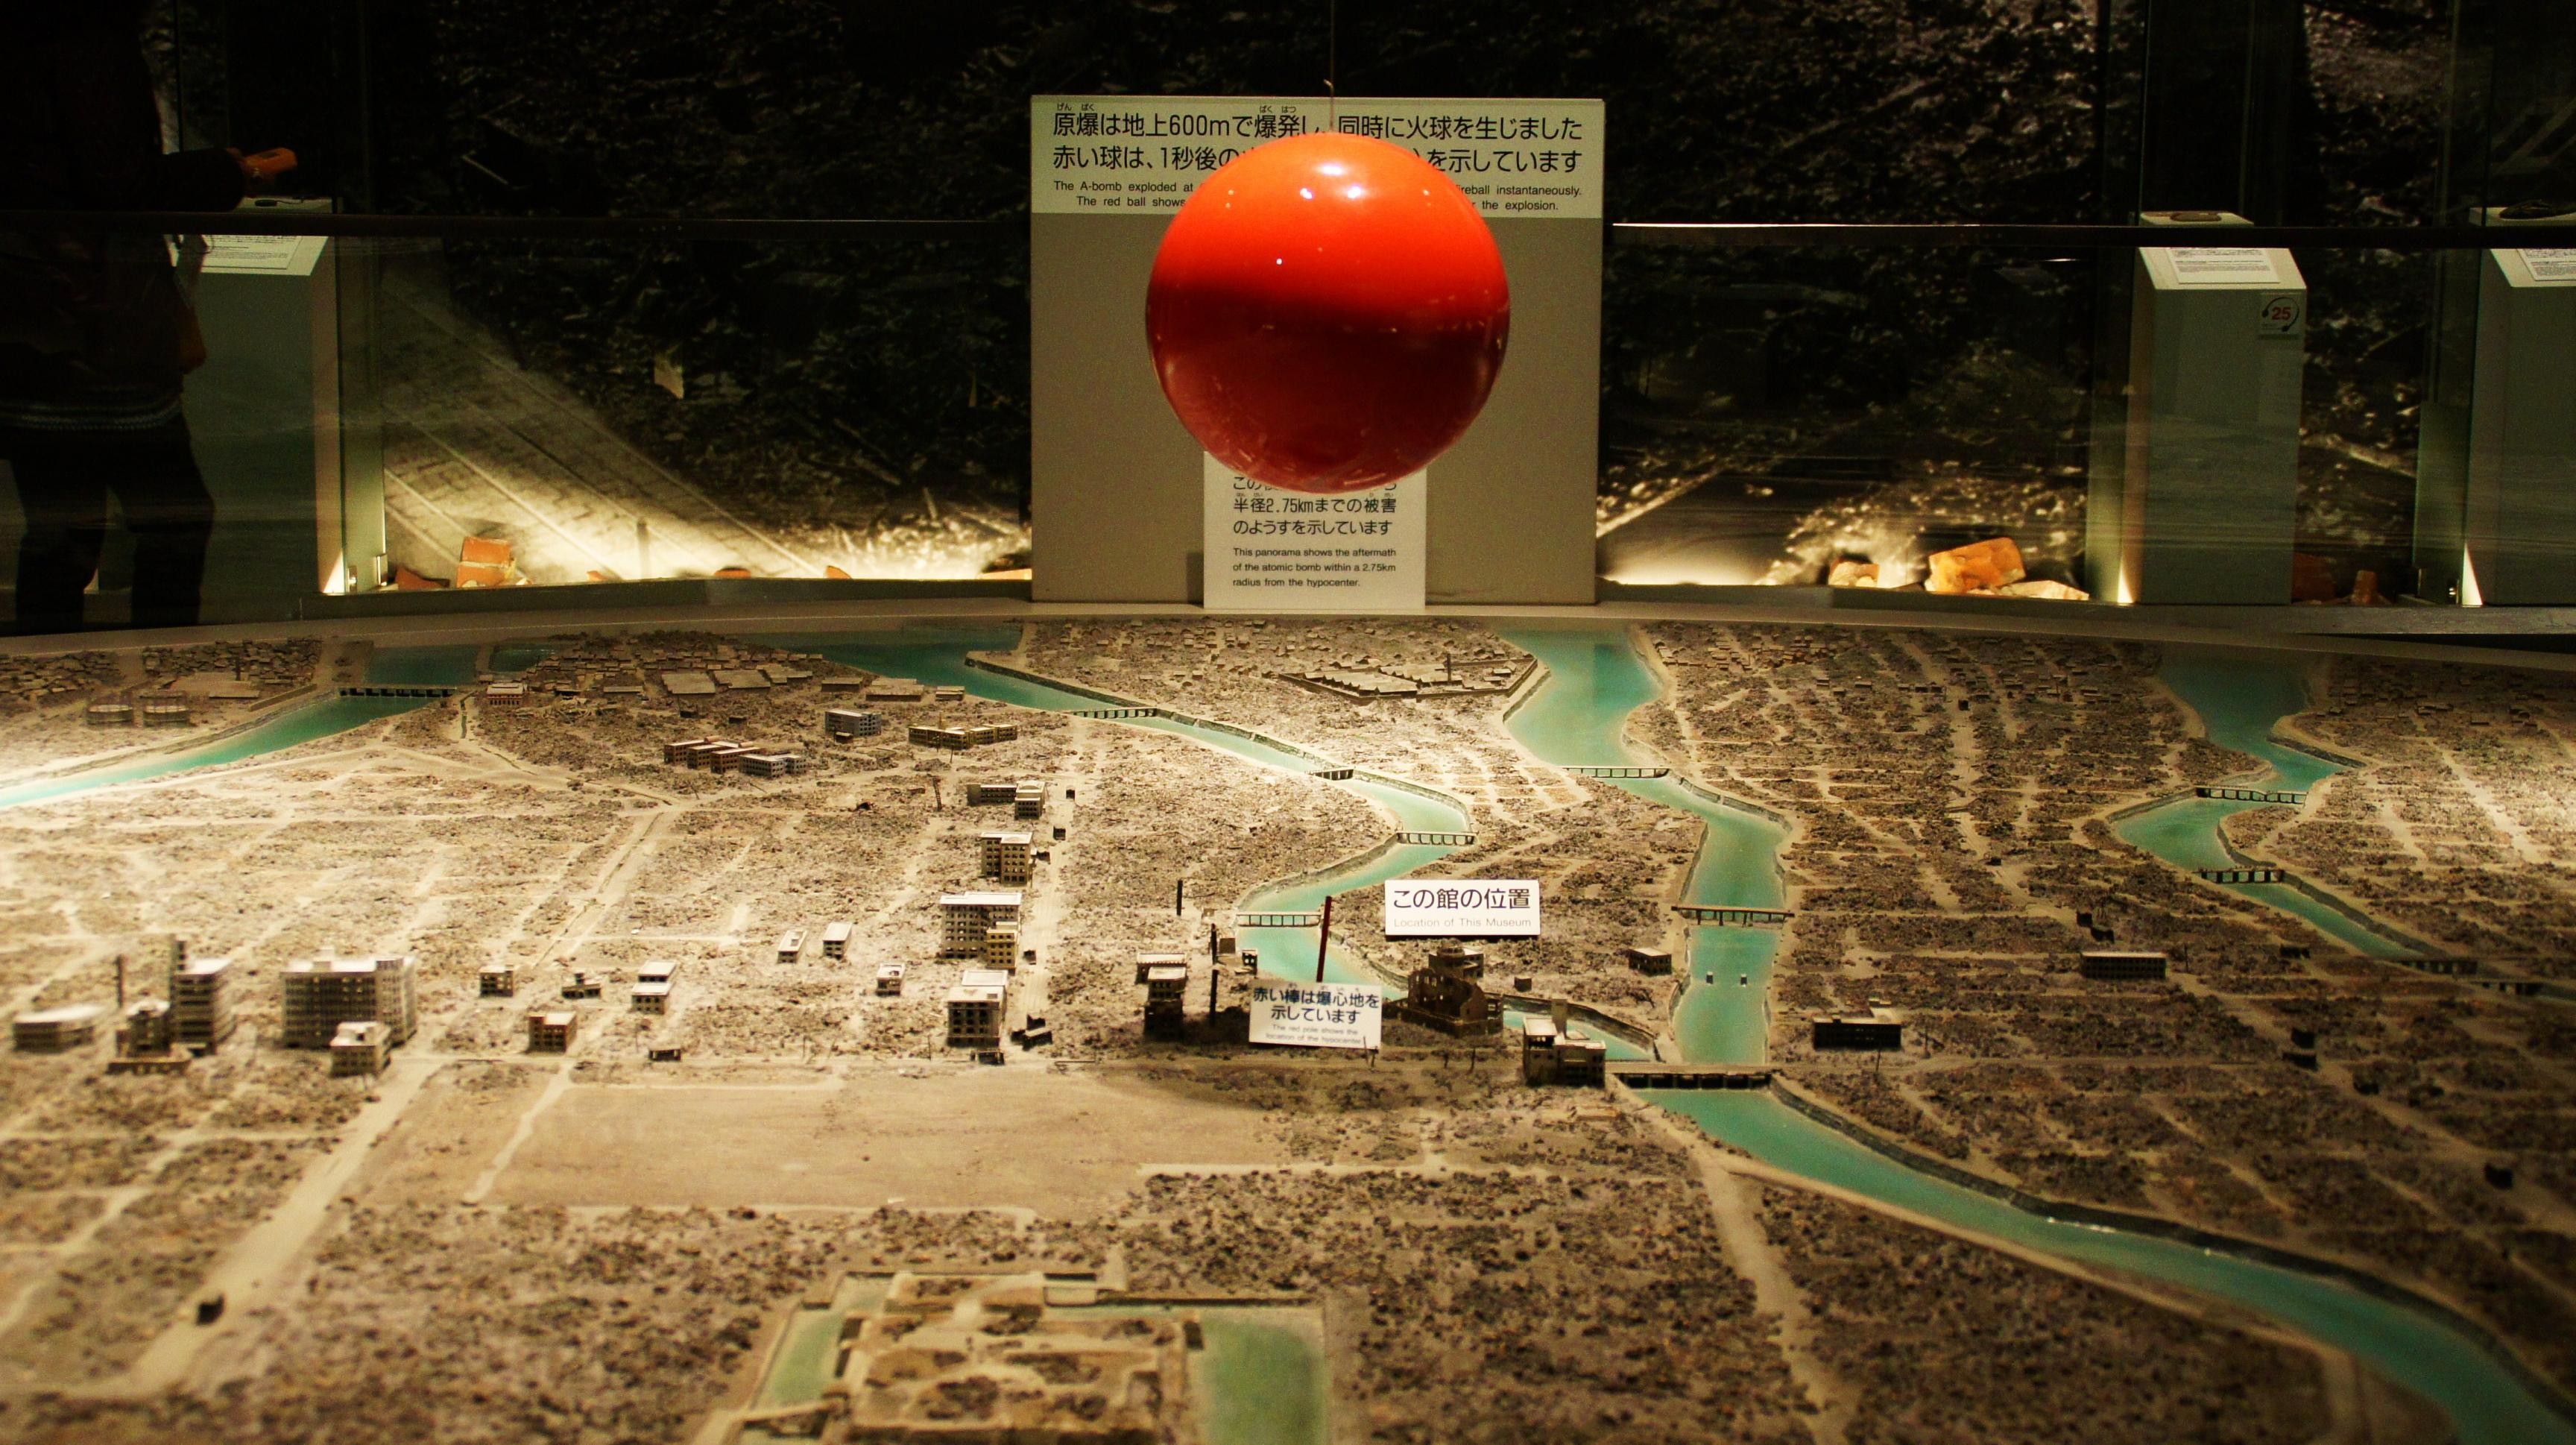 The Hiroshima Peace Memorial Museum, which continues to appeal to future generations with NO MORE HIROSHIMA